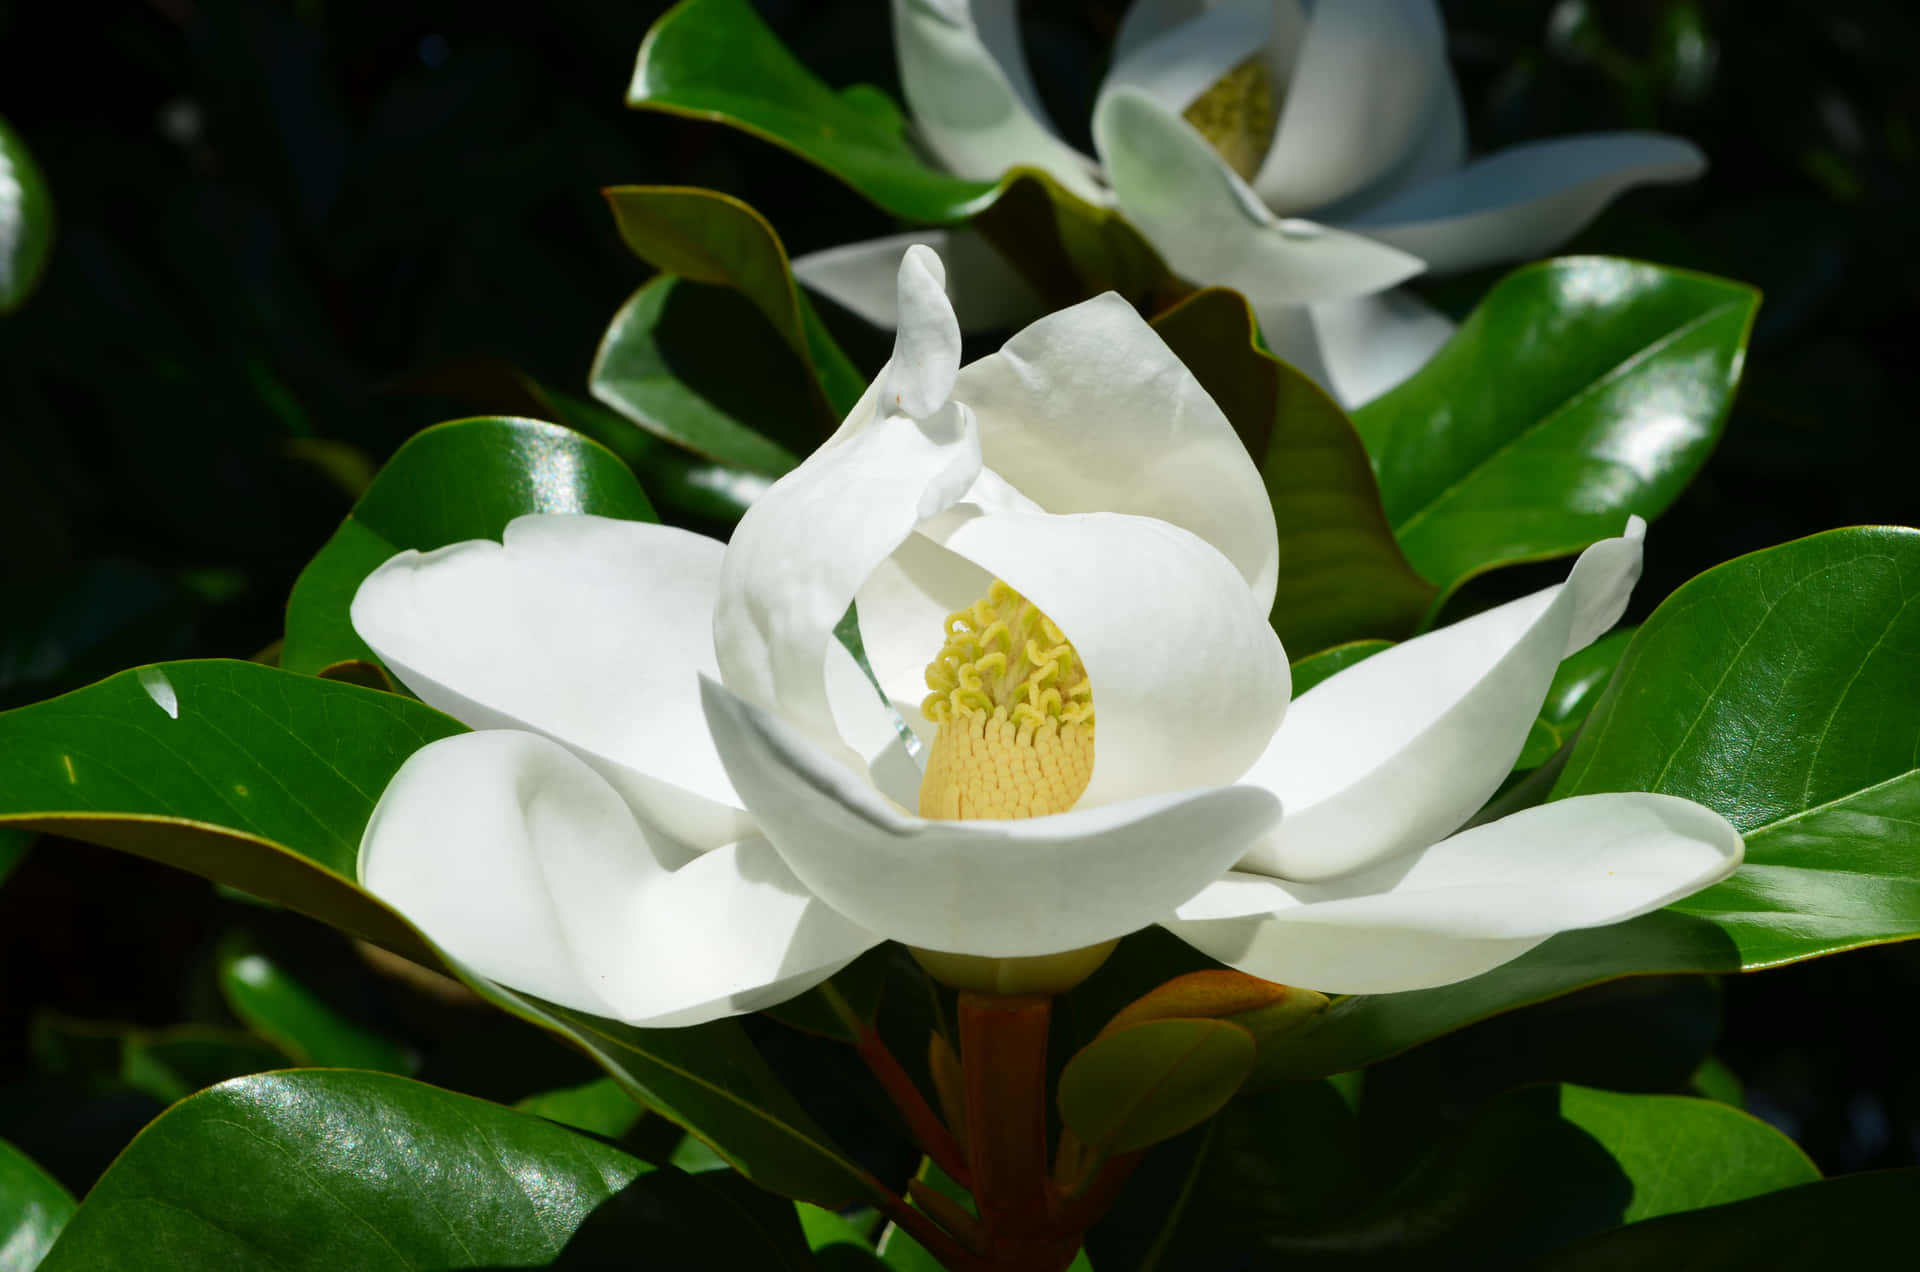 A picture of a beautiful Magnolia flower